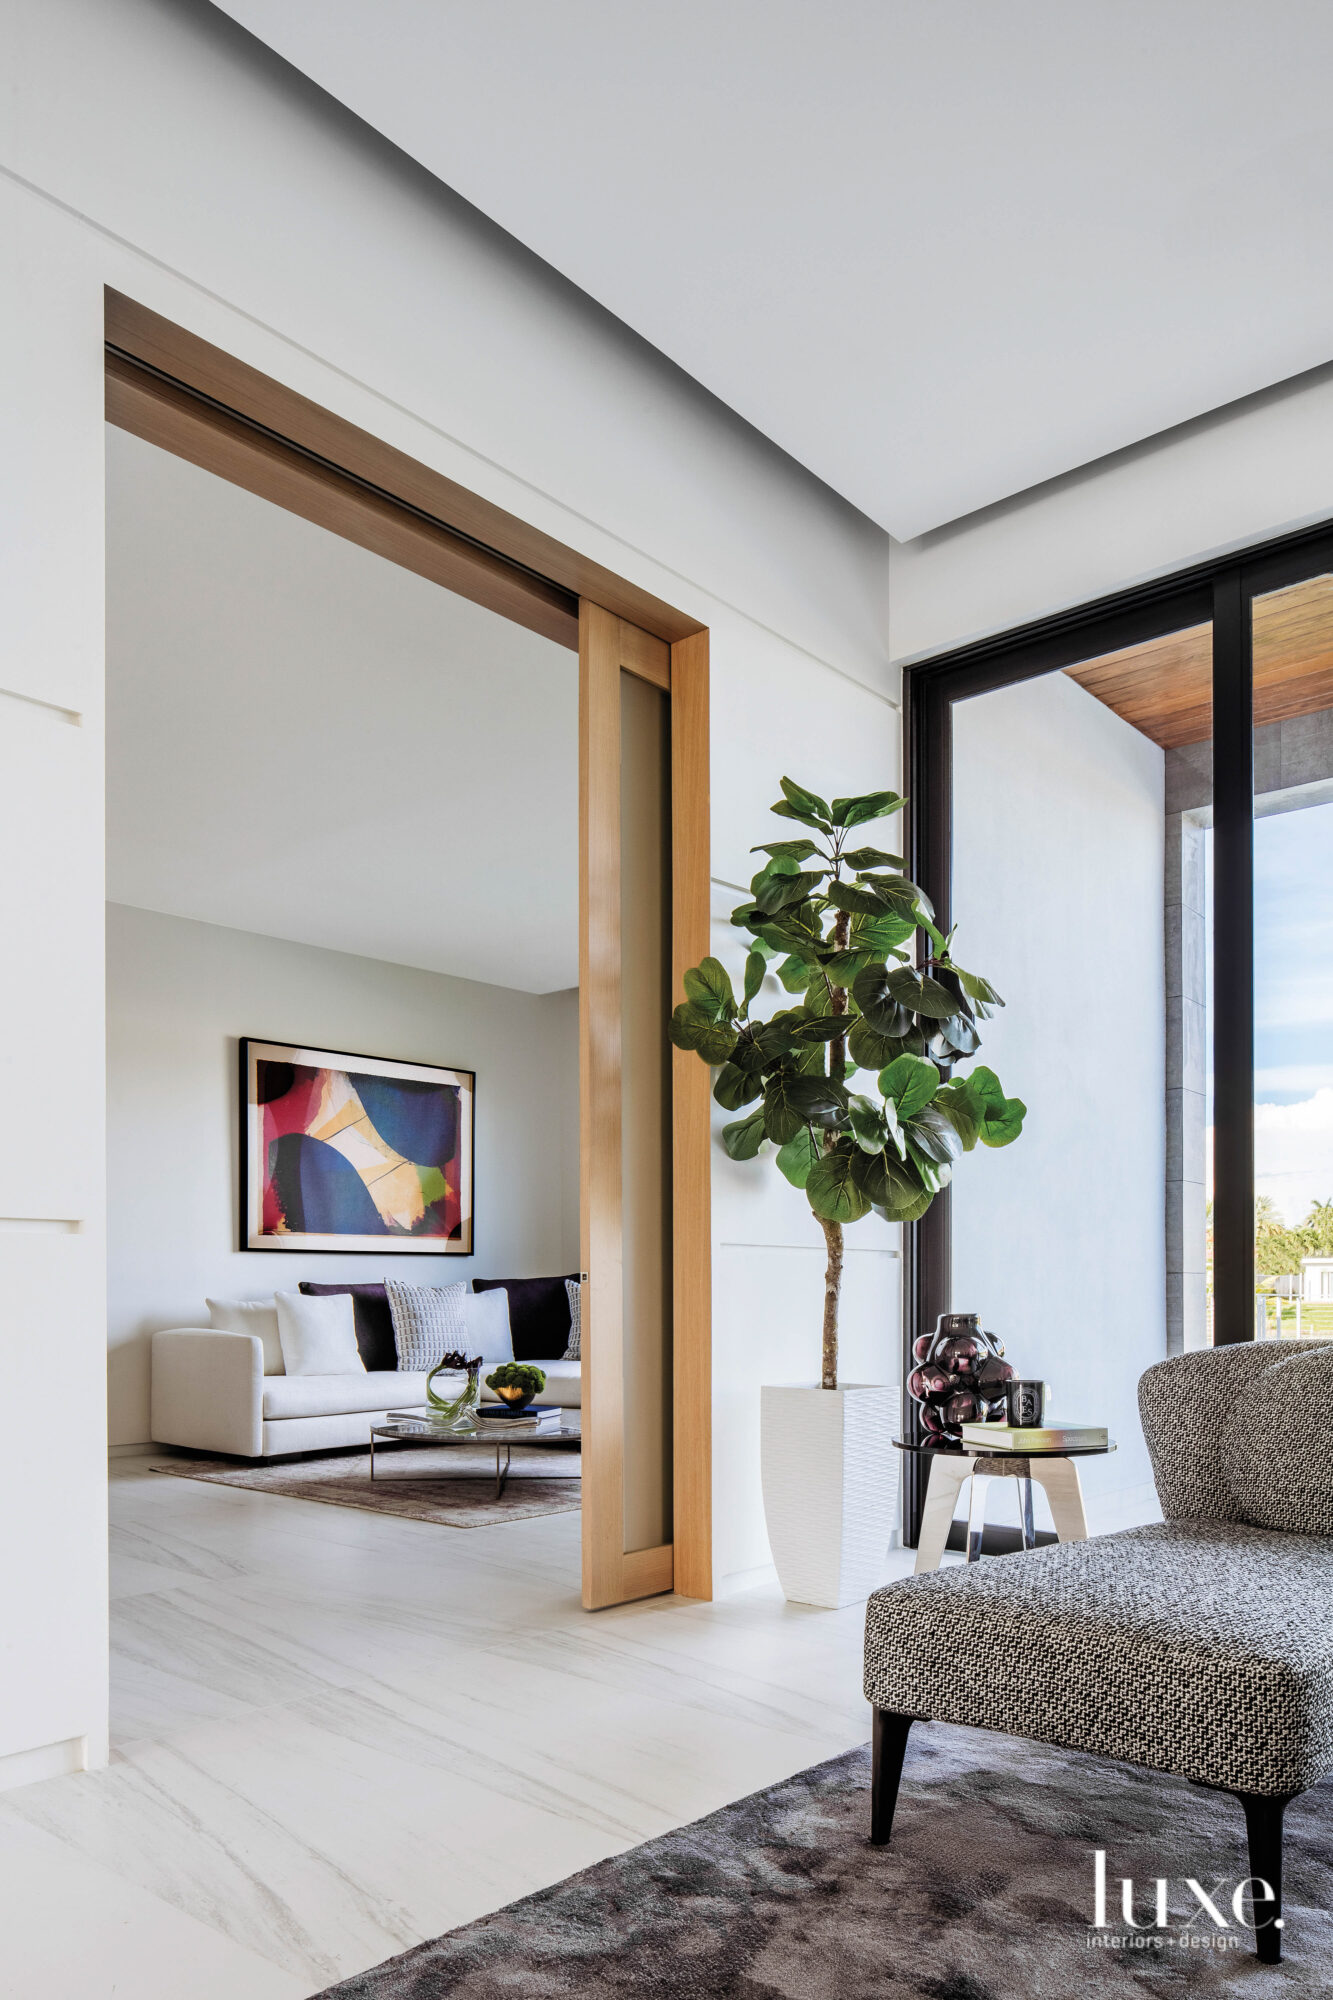 A fiddle leaf fig plant marks the space where the living room opens up to the family room.